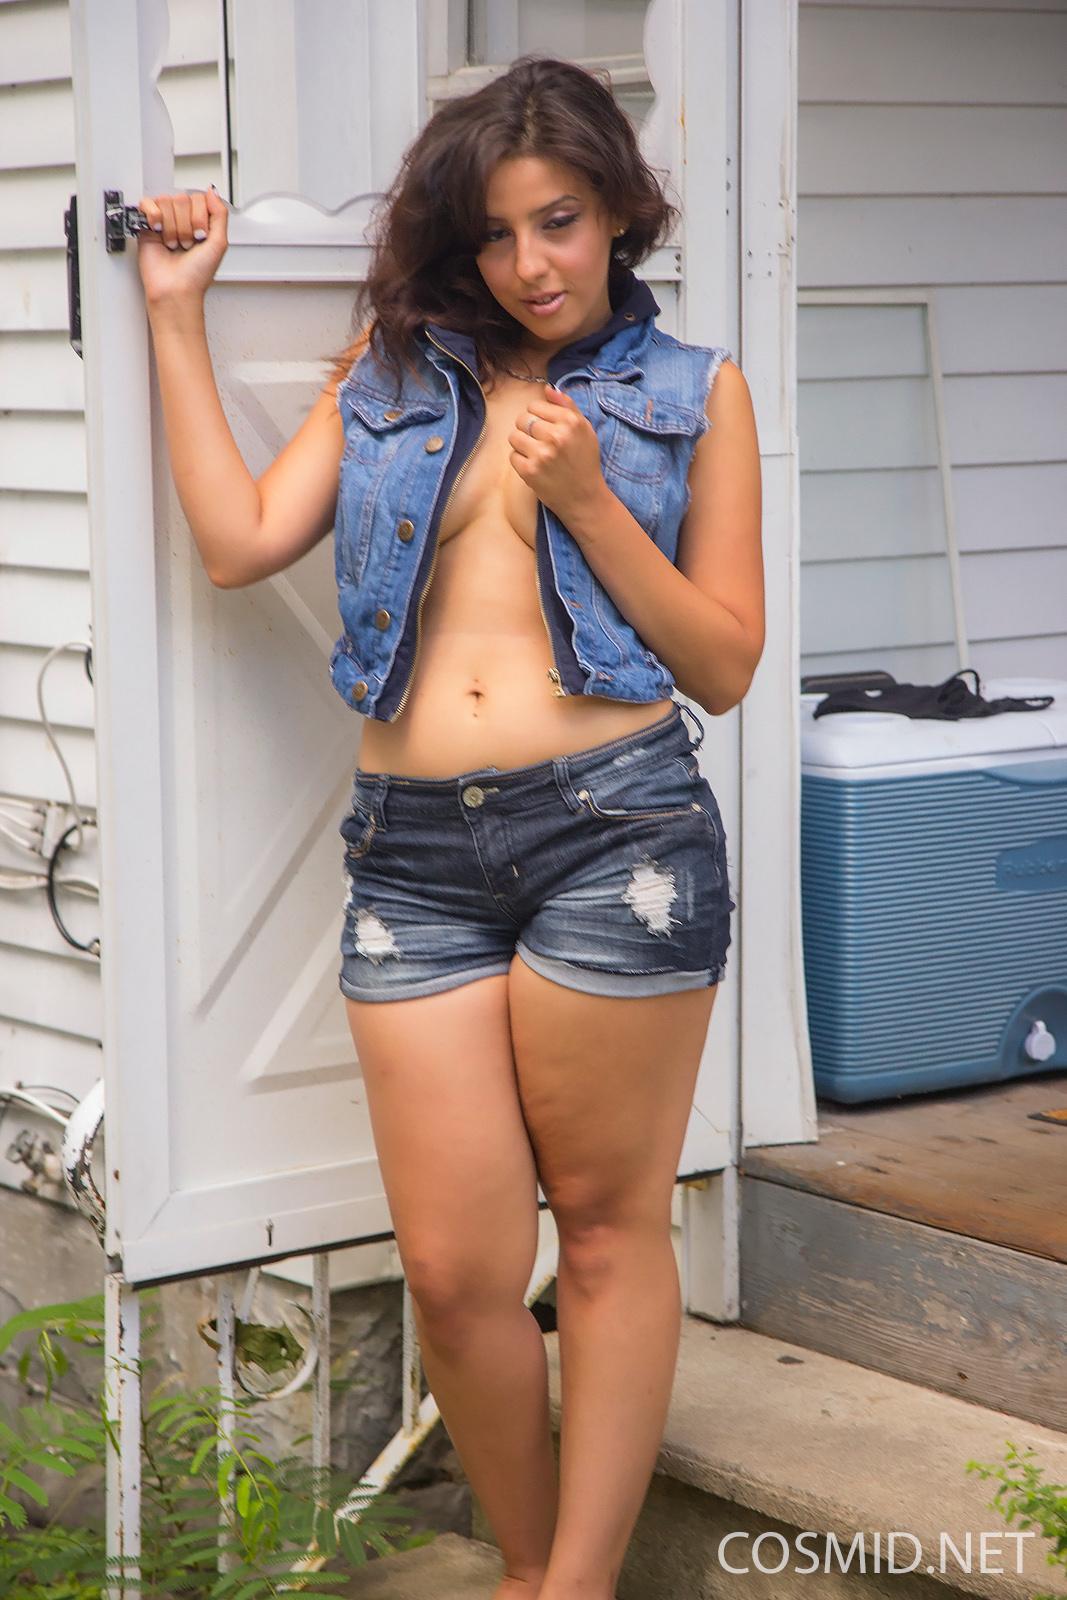 Brunette newcomer Aleixs teases with her curvy body on the front porch #52969384